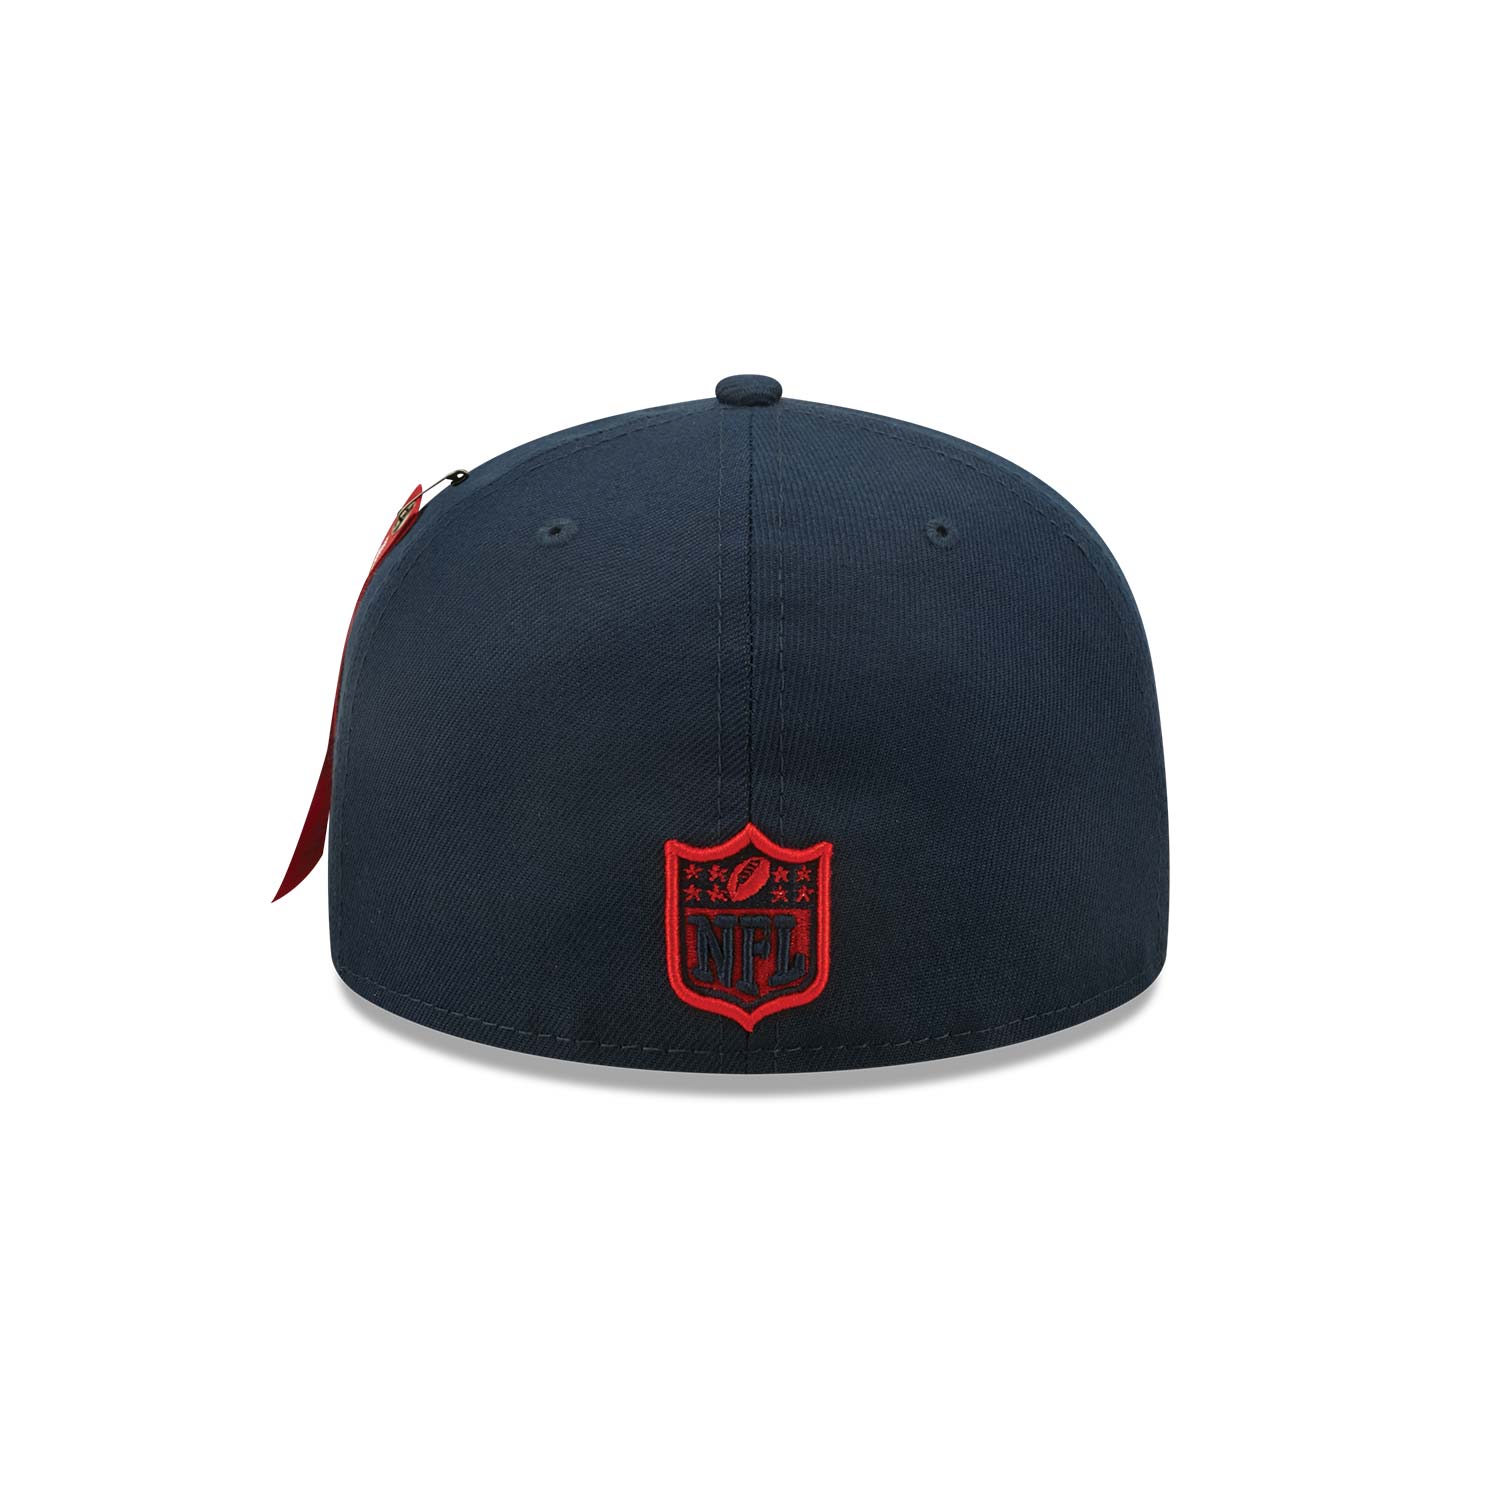 Cappellino 59FIFTY Fitted New England Patriots x Alpha Industries Blu